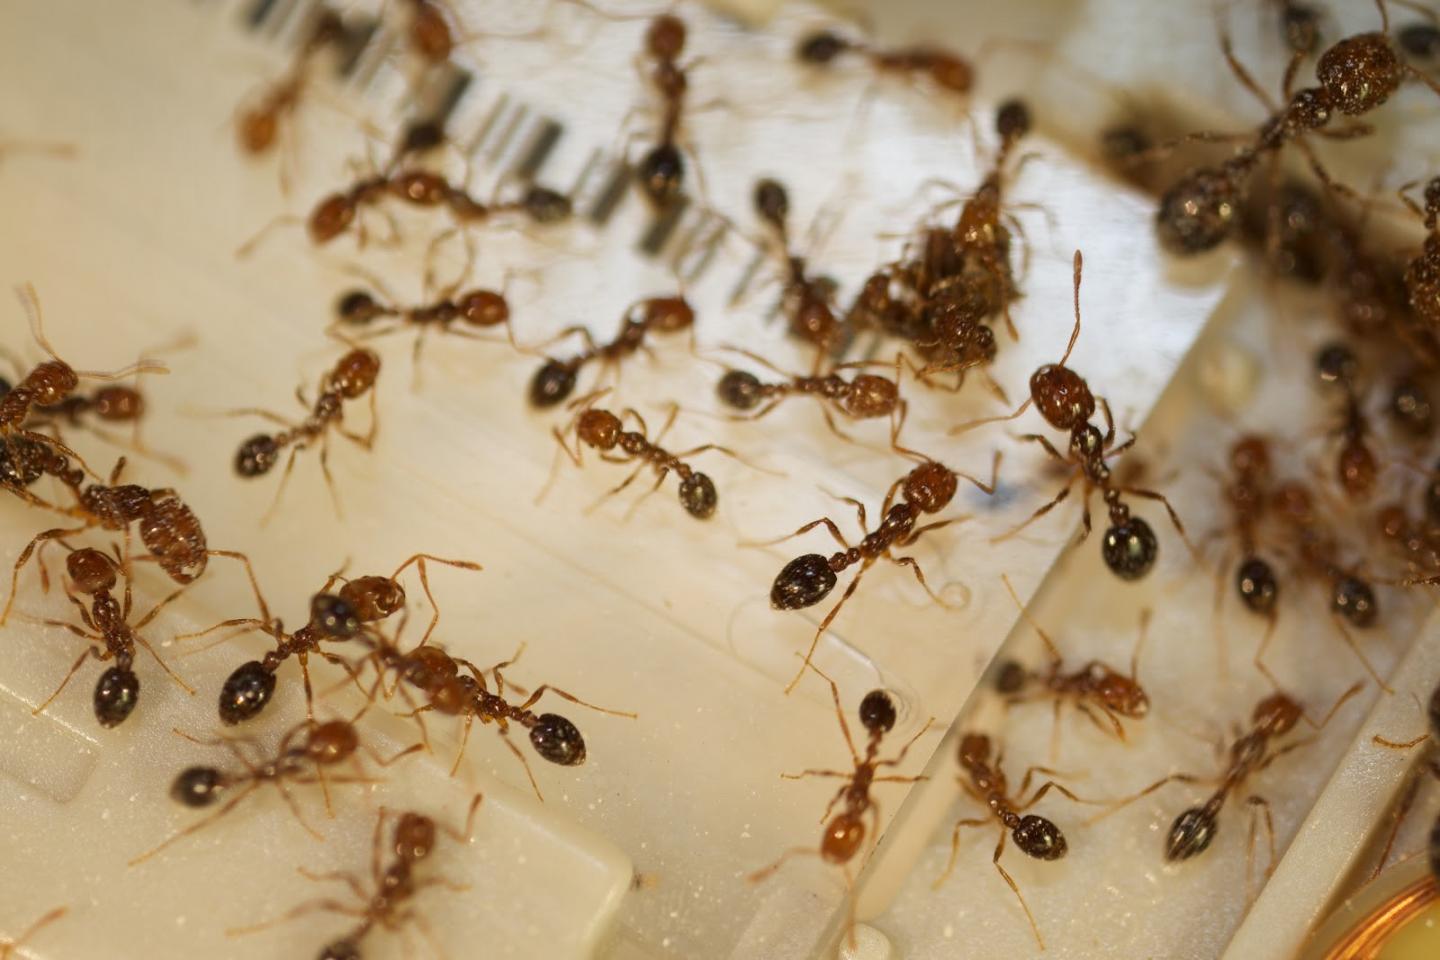 Workers of the Red Fire Ant on a Sequencing Chip